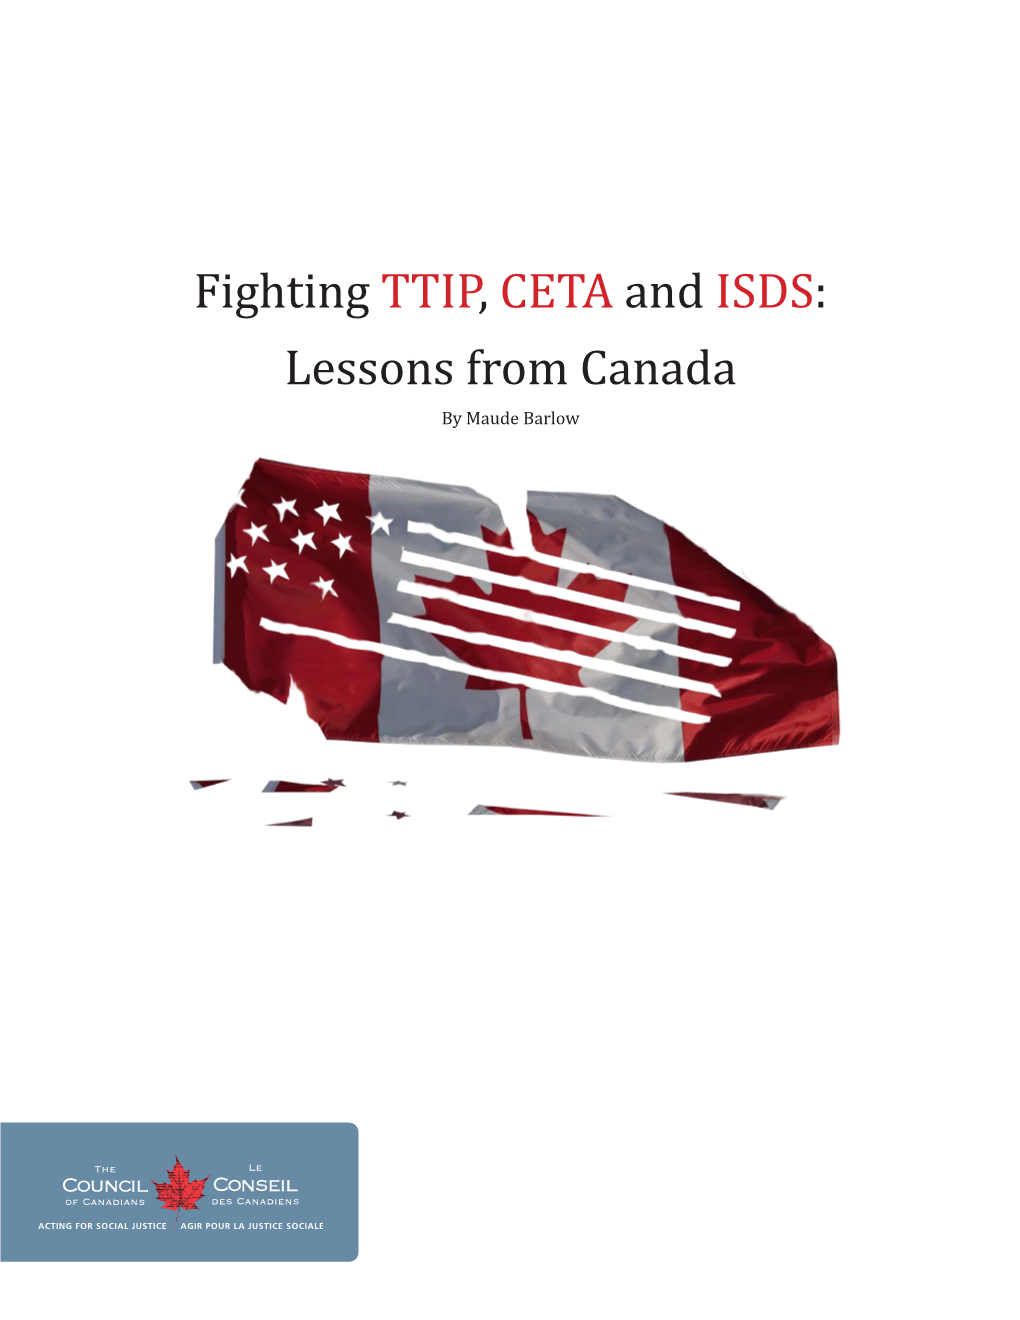 Fighting TTIP, CETA and ISDS: Lessons from Canada by Maude Barlow About the Author